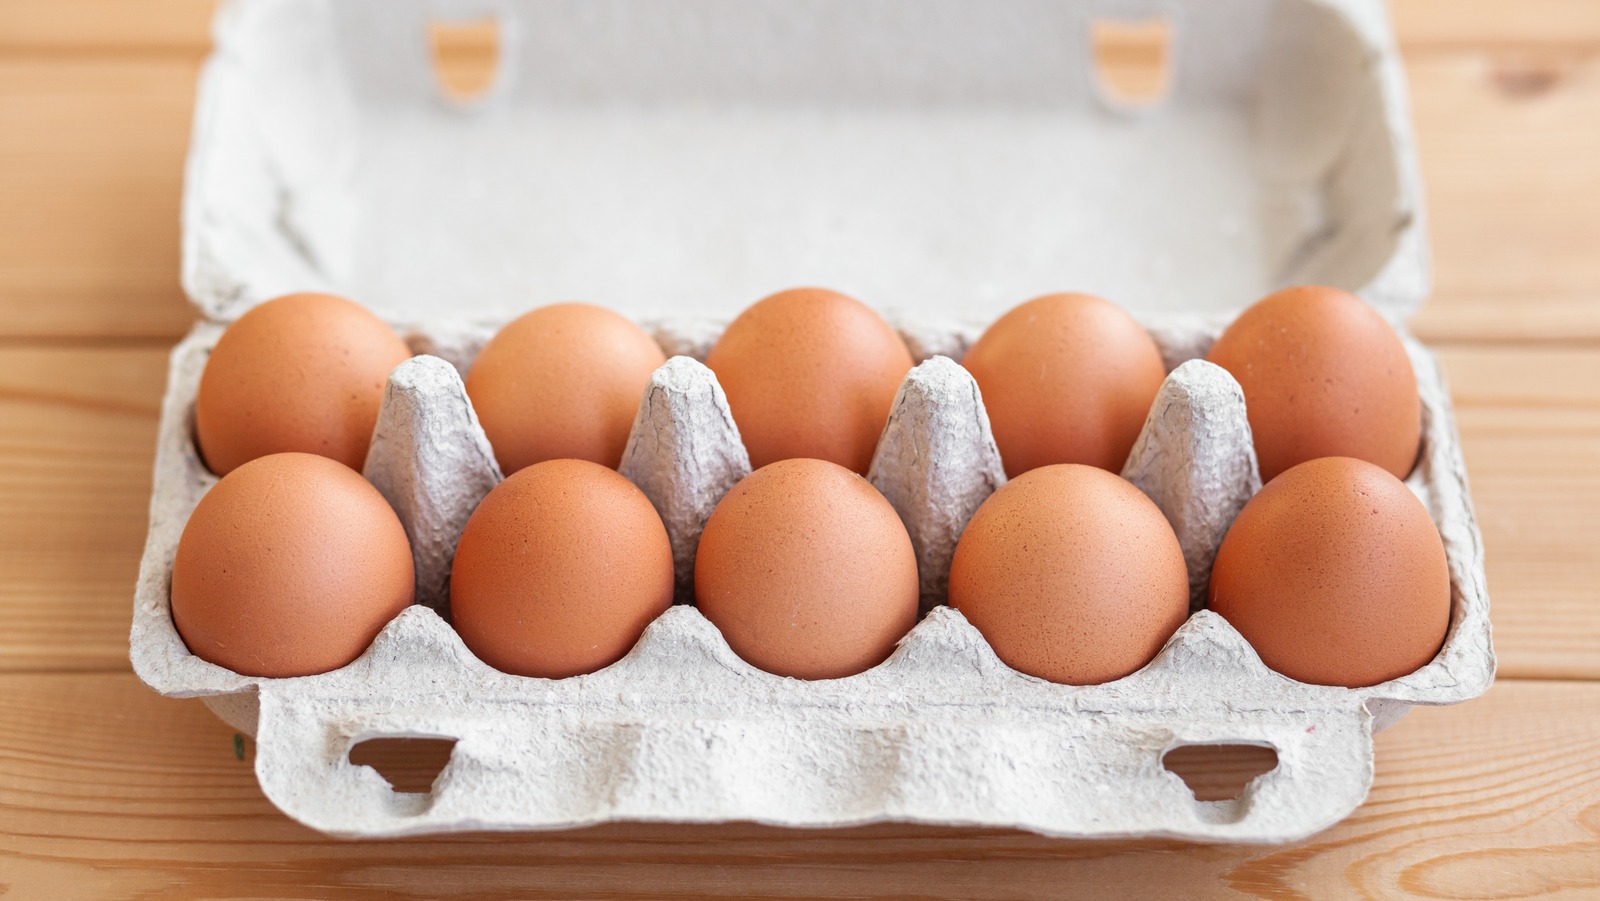 Reddit Is In Shambles Over The Price Of Aldi Eggs